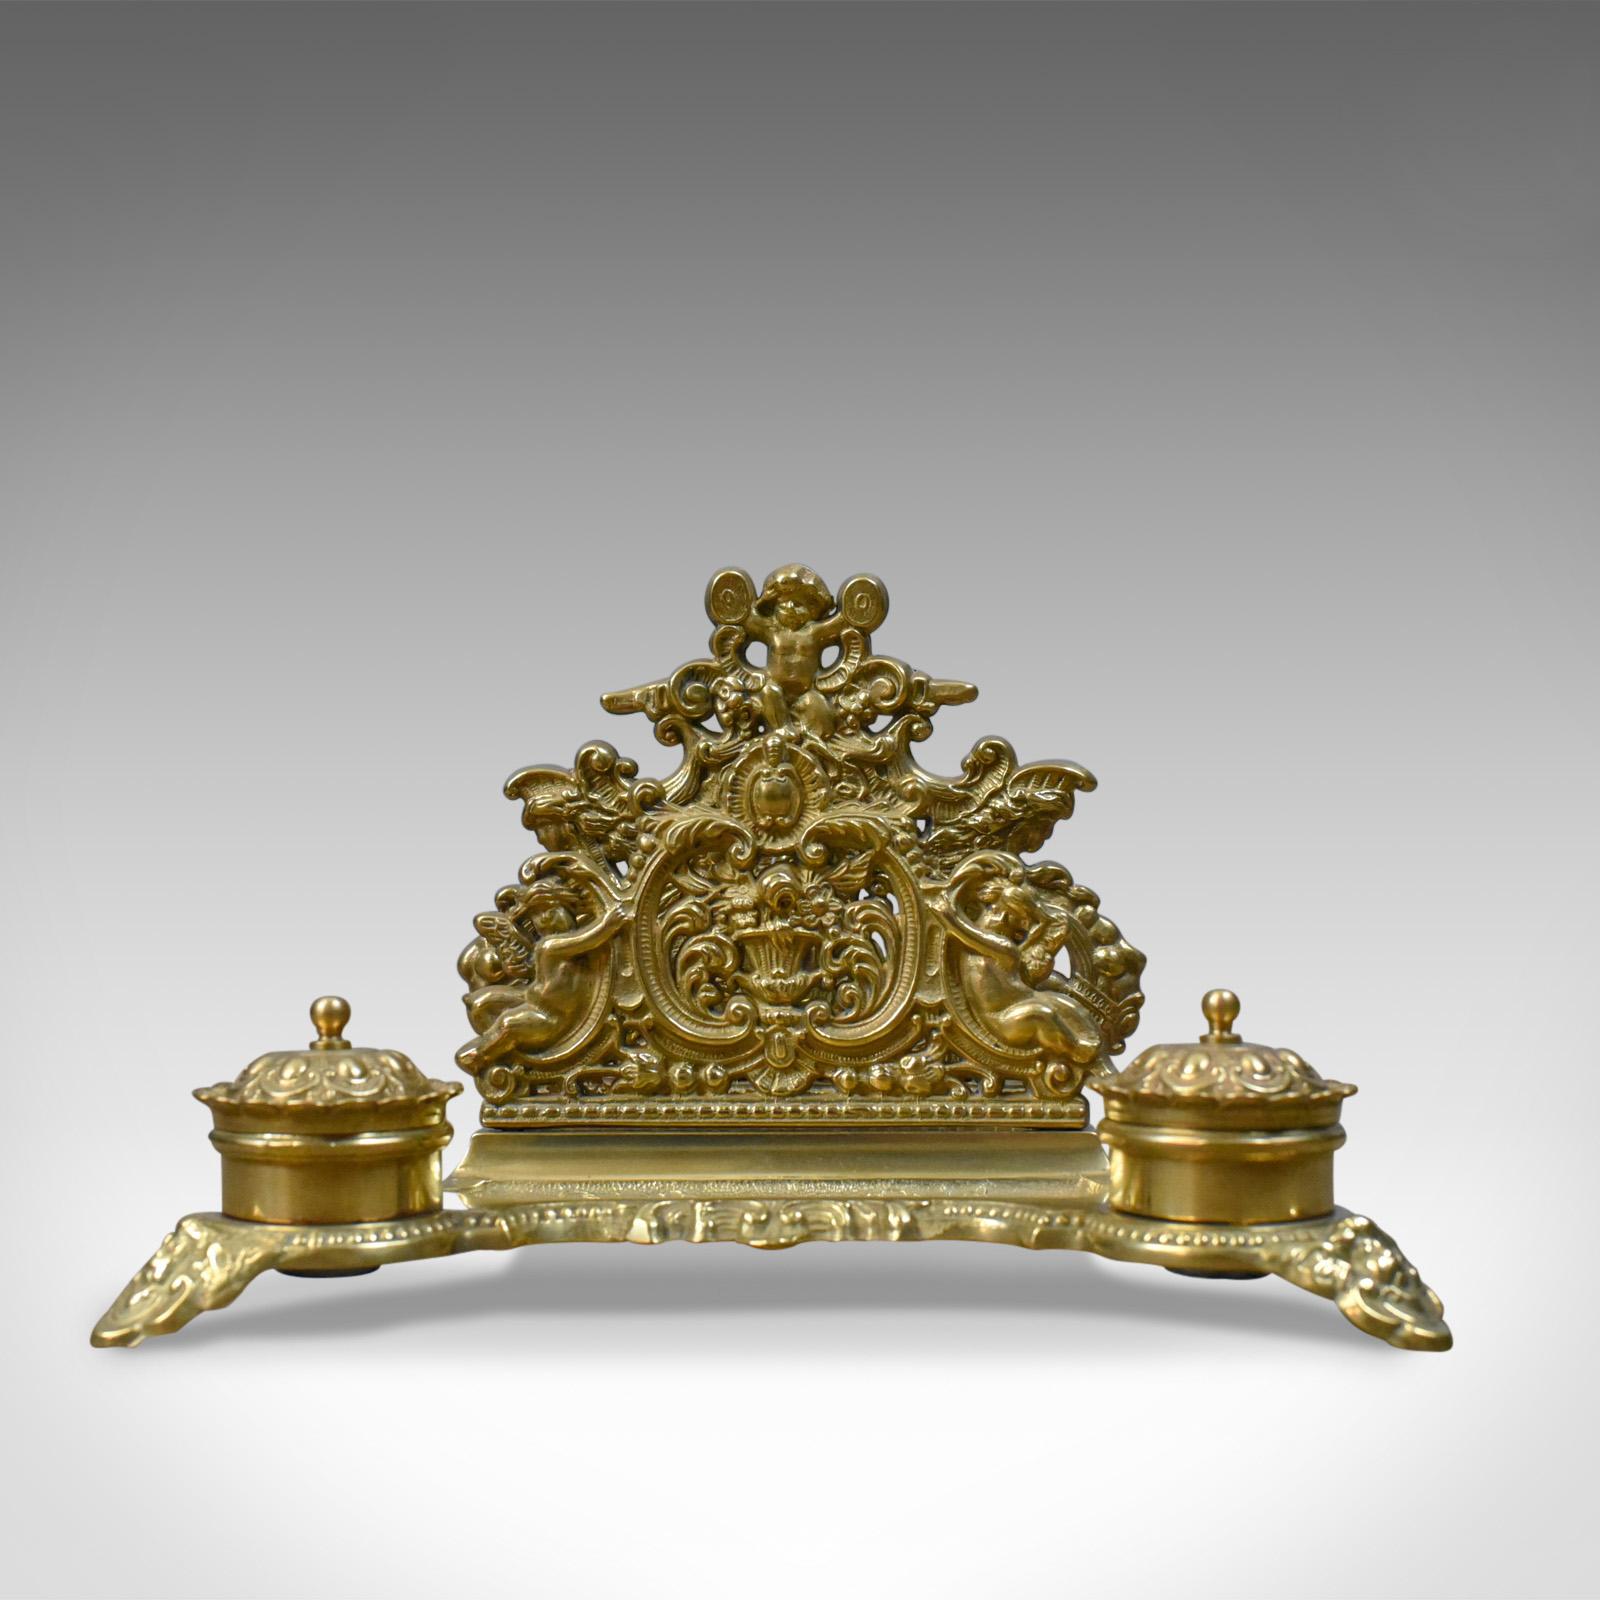 This is an antique desk stand, an English, Edwardian gilt metal letter rack with inkwells dating to circa 1910.

Impressive Edwardian desk stand in gilt metal
Profusely decorated with scroll, floral and foliate detail
The letter rack formed by a